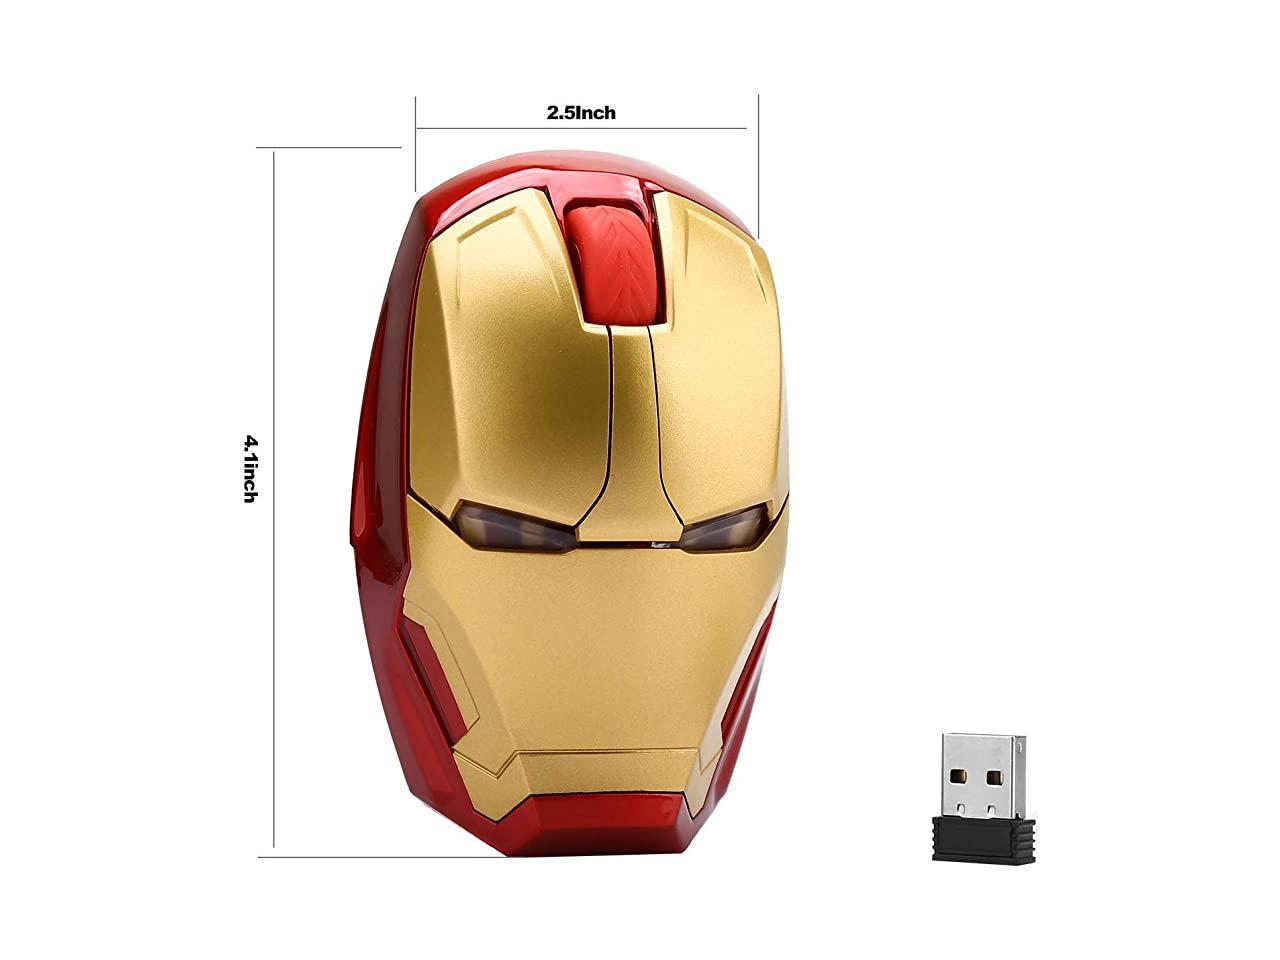 Iron Man Mouse Wireless Gaming Gamer Computer Mice Silent Button Click 2.4g USB